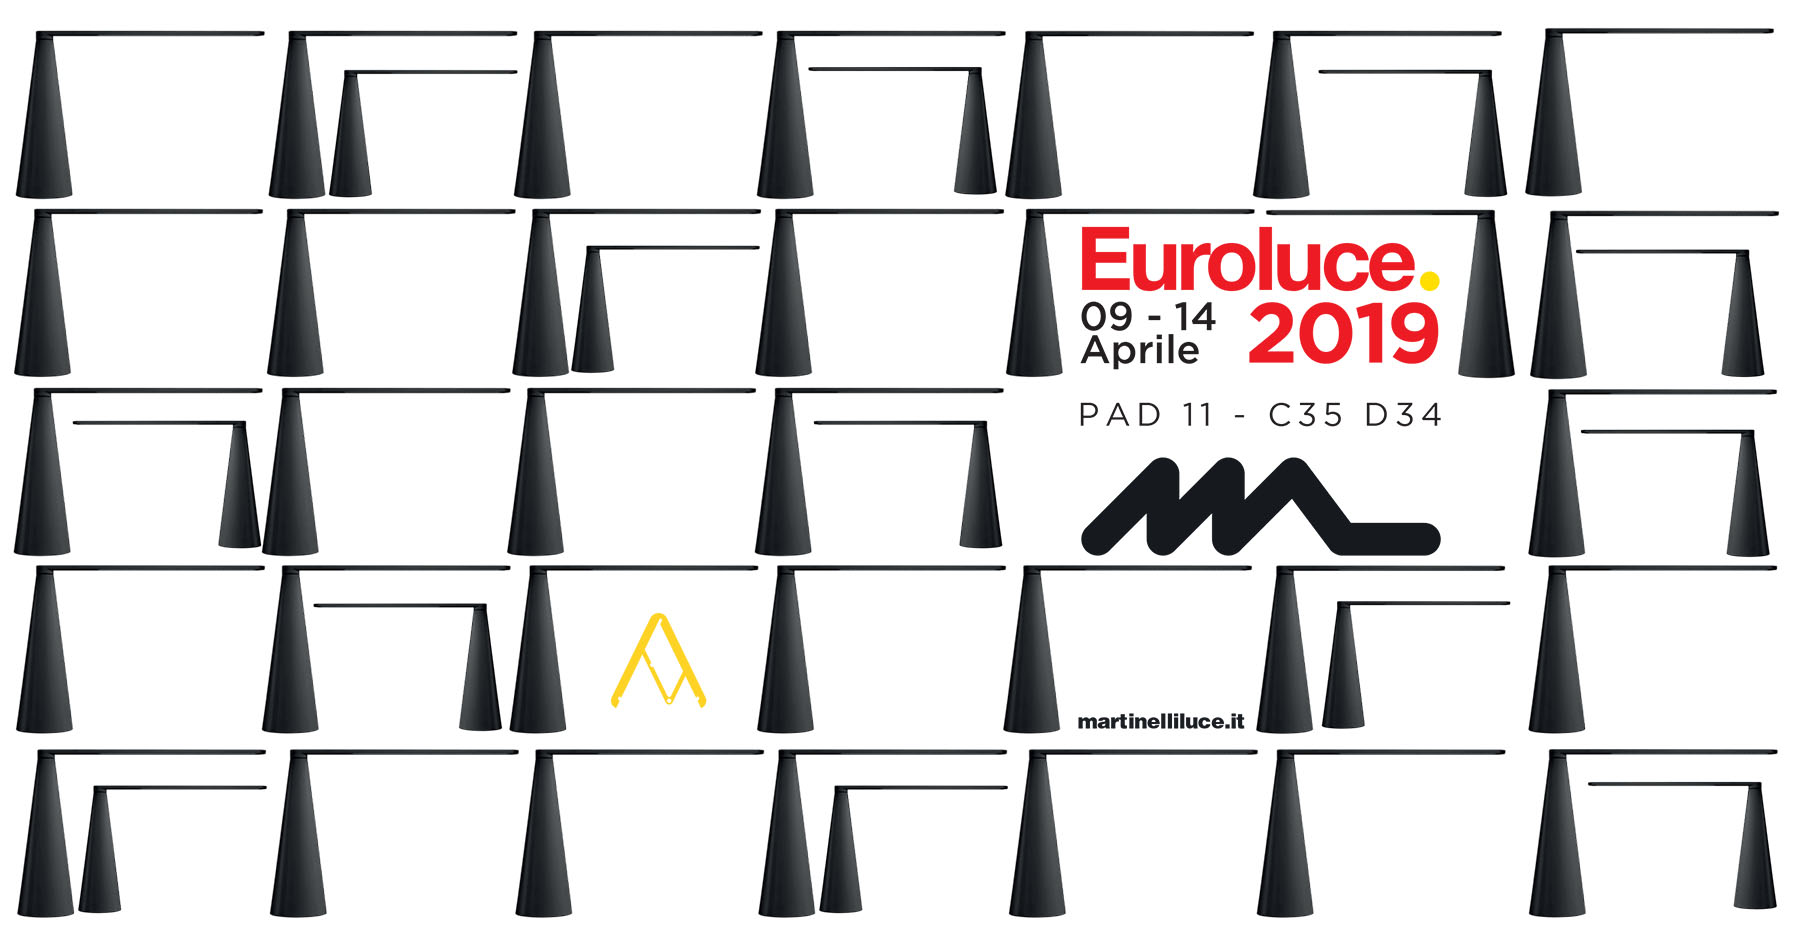 A new appointment with Euroluce